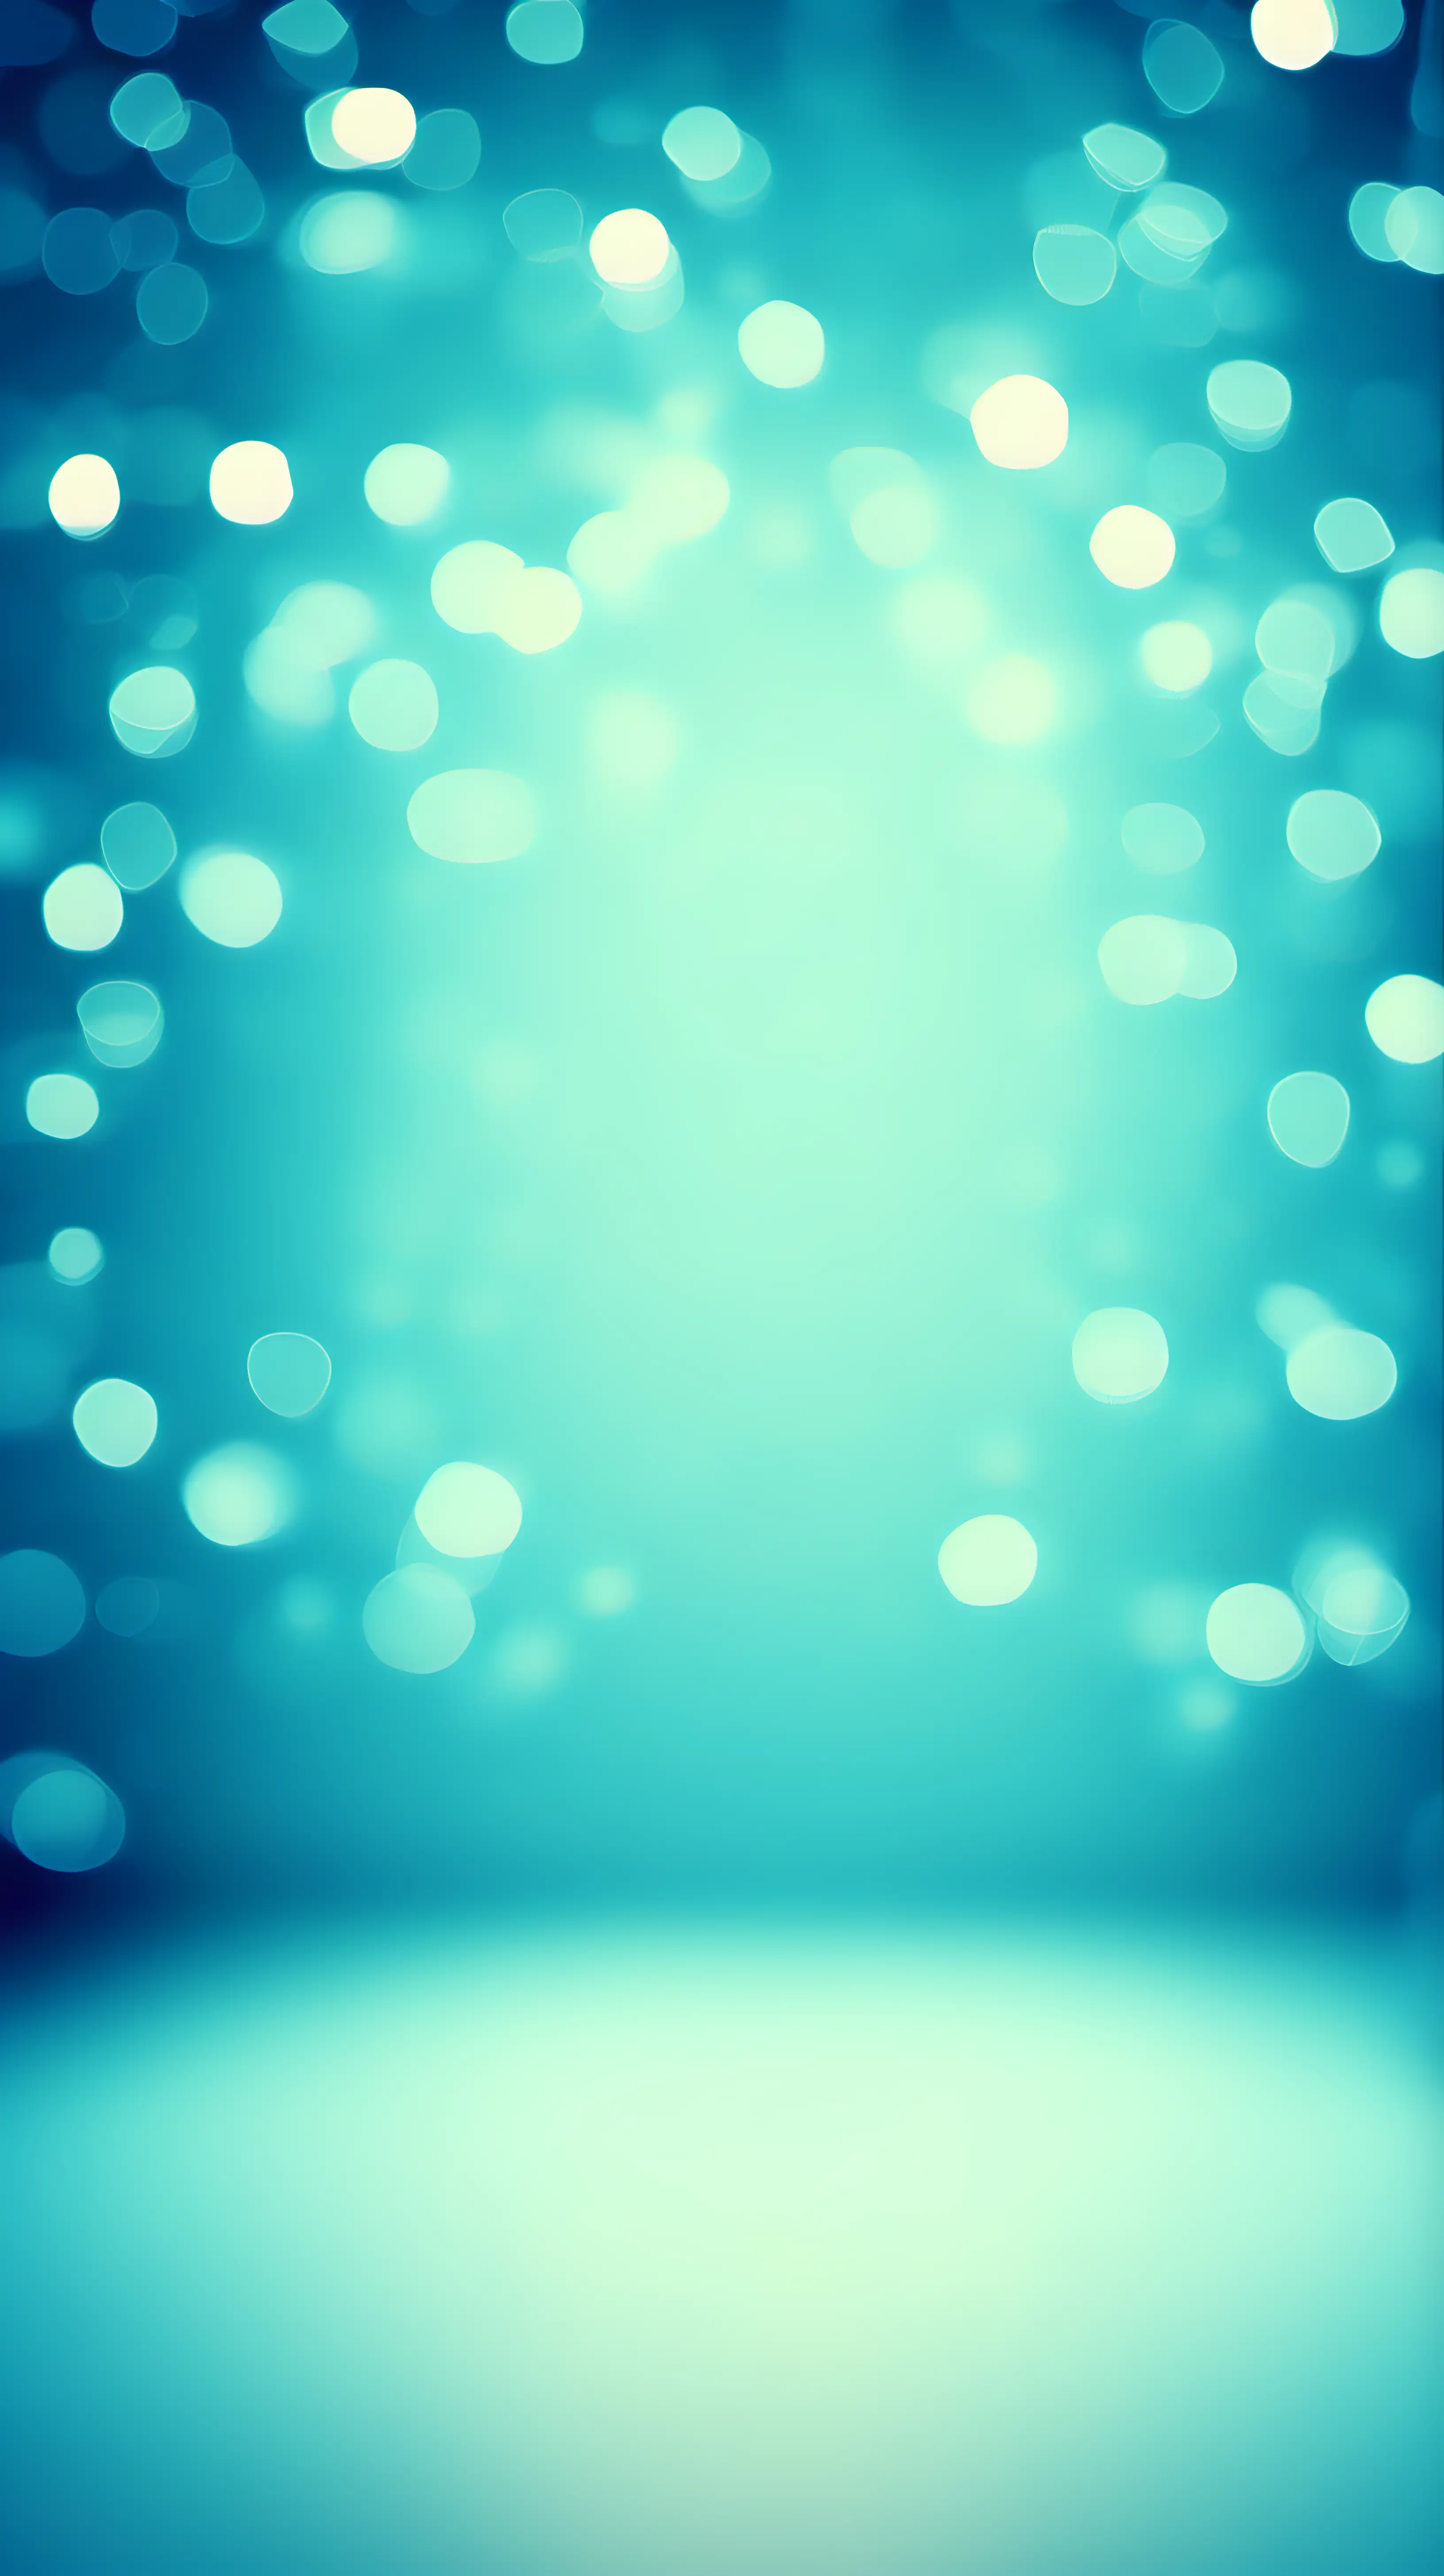 Blue and Powder blue mixed bokeh background with lower level floor